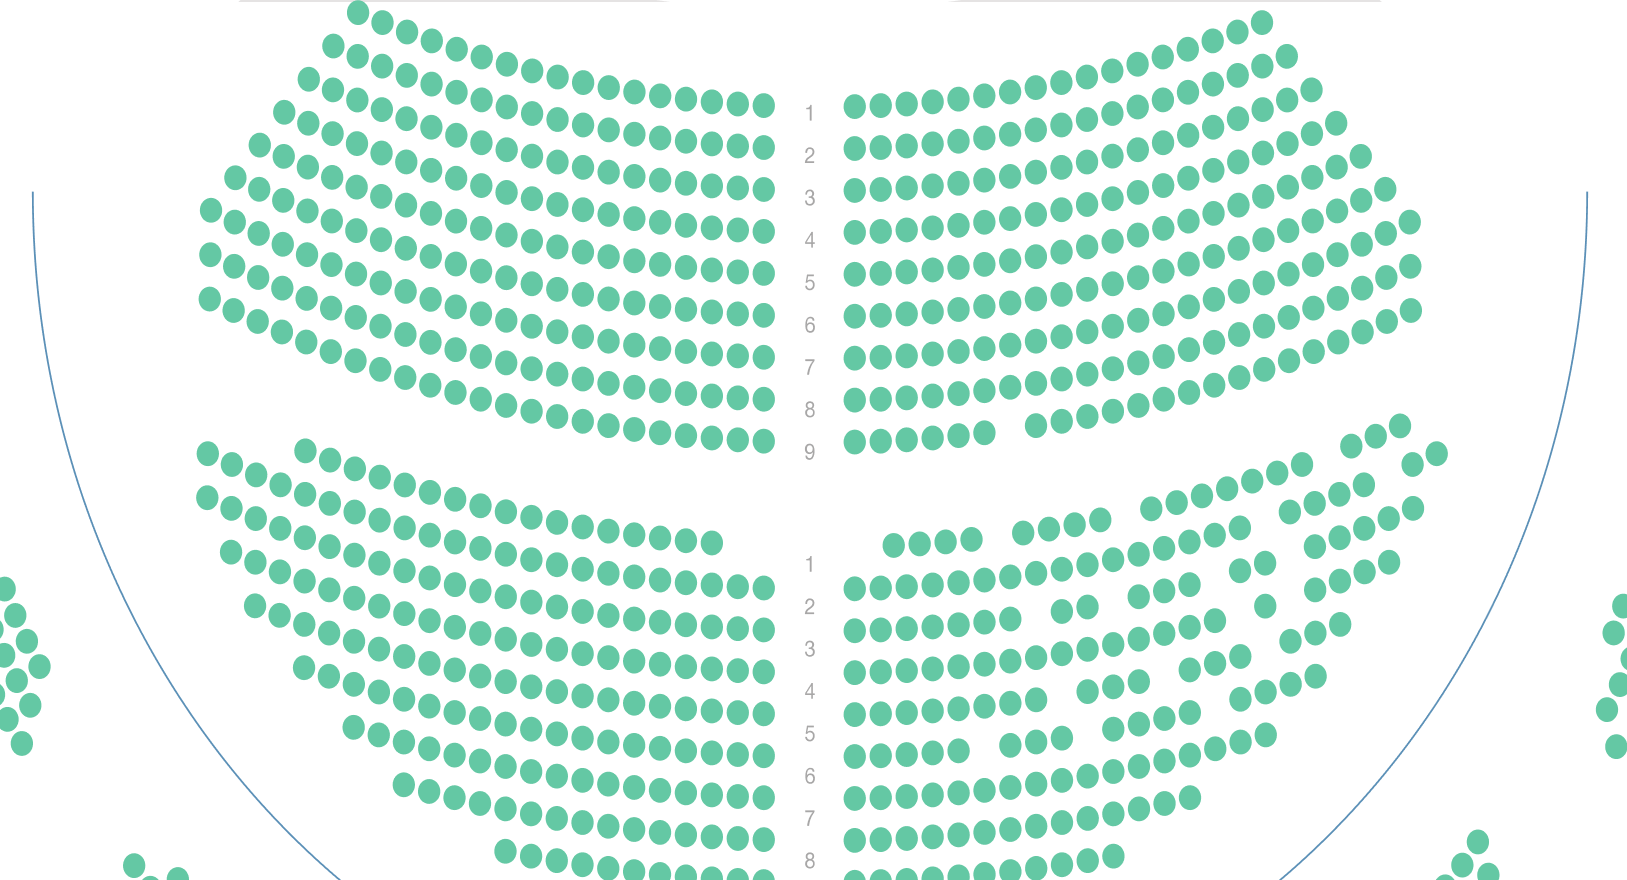 Seating plans. How do we render?